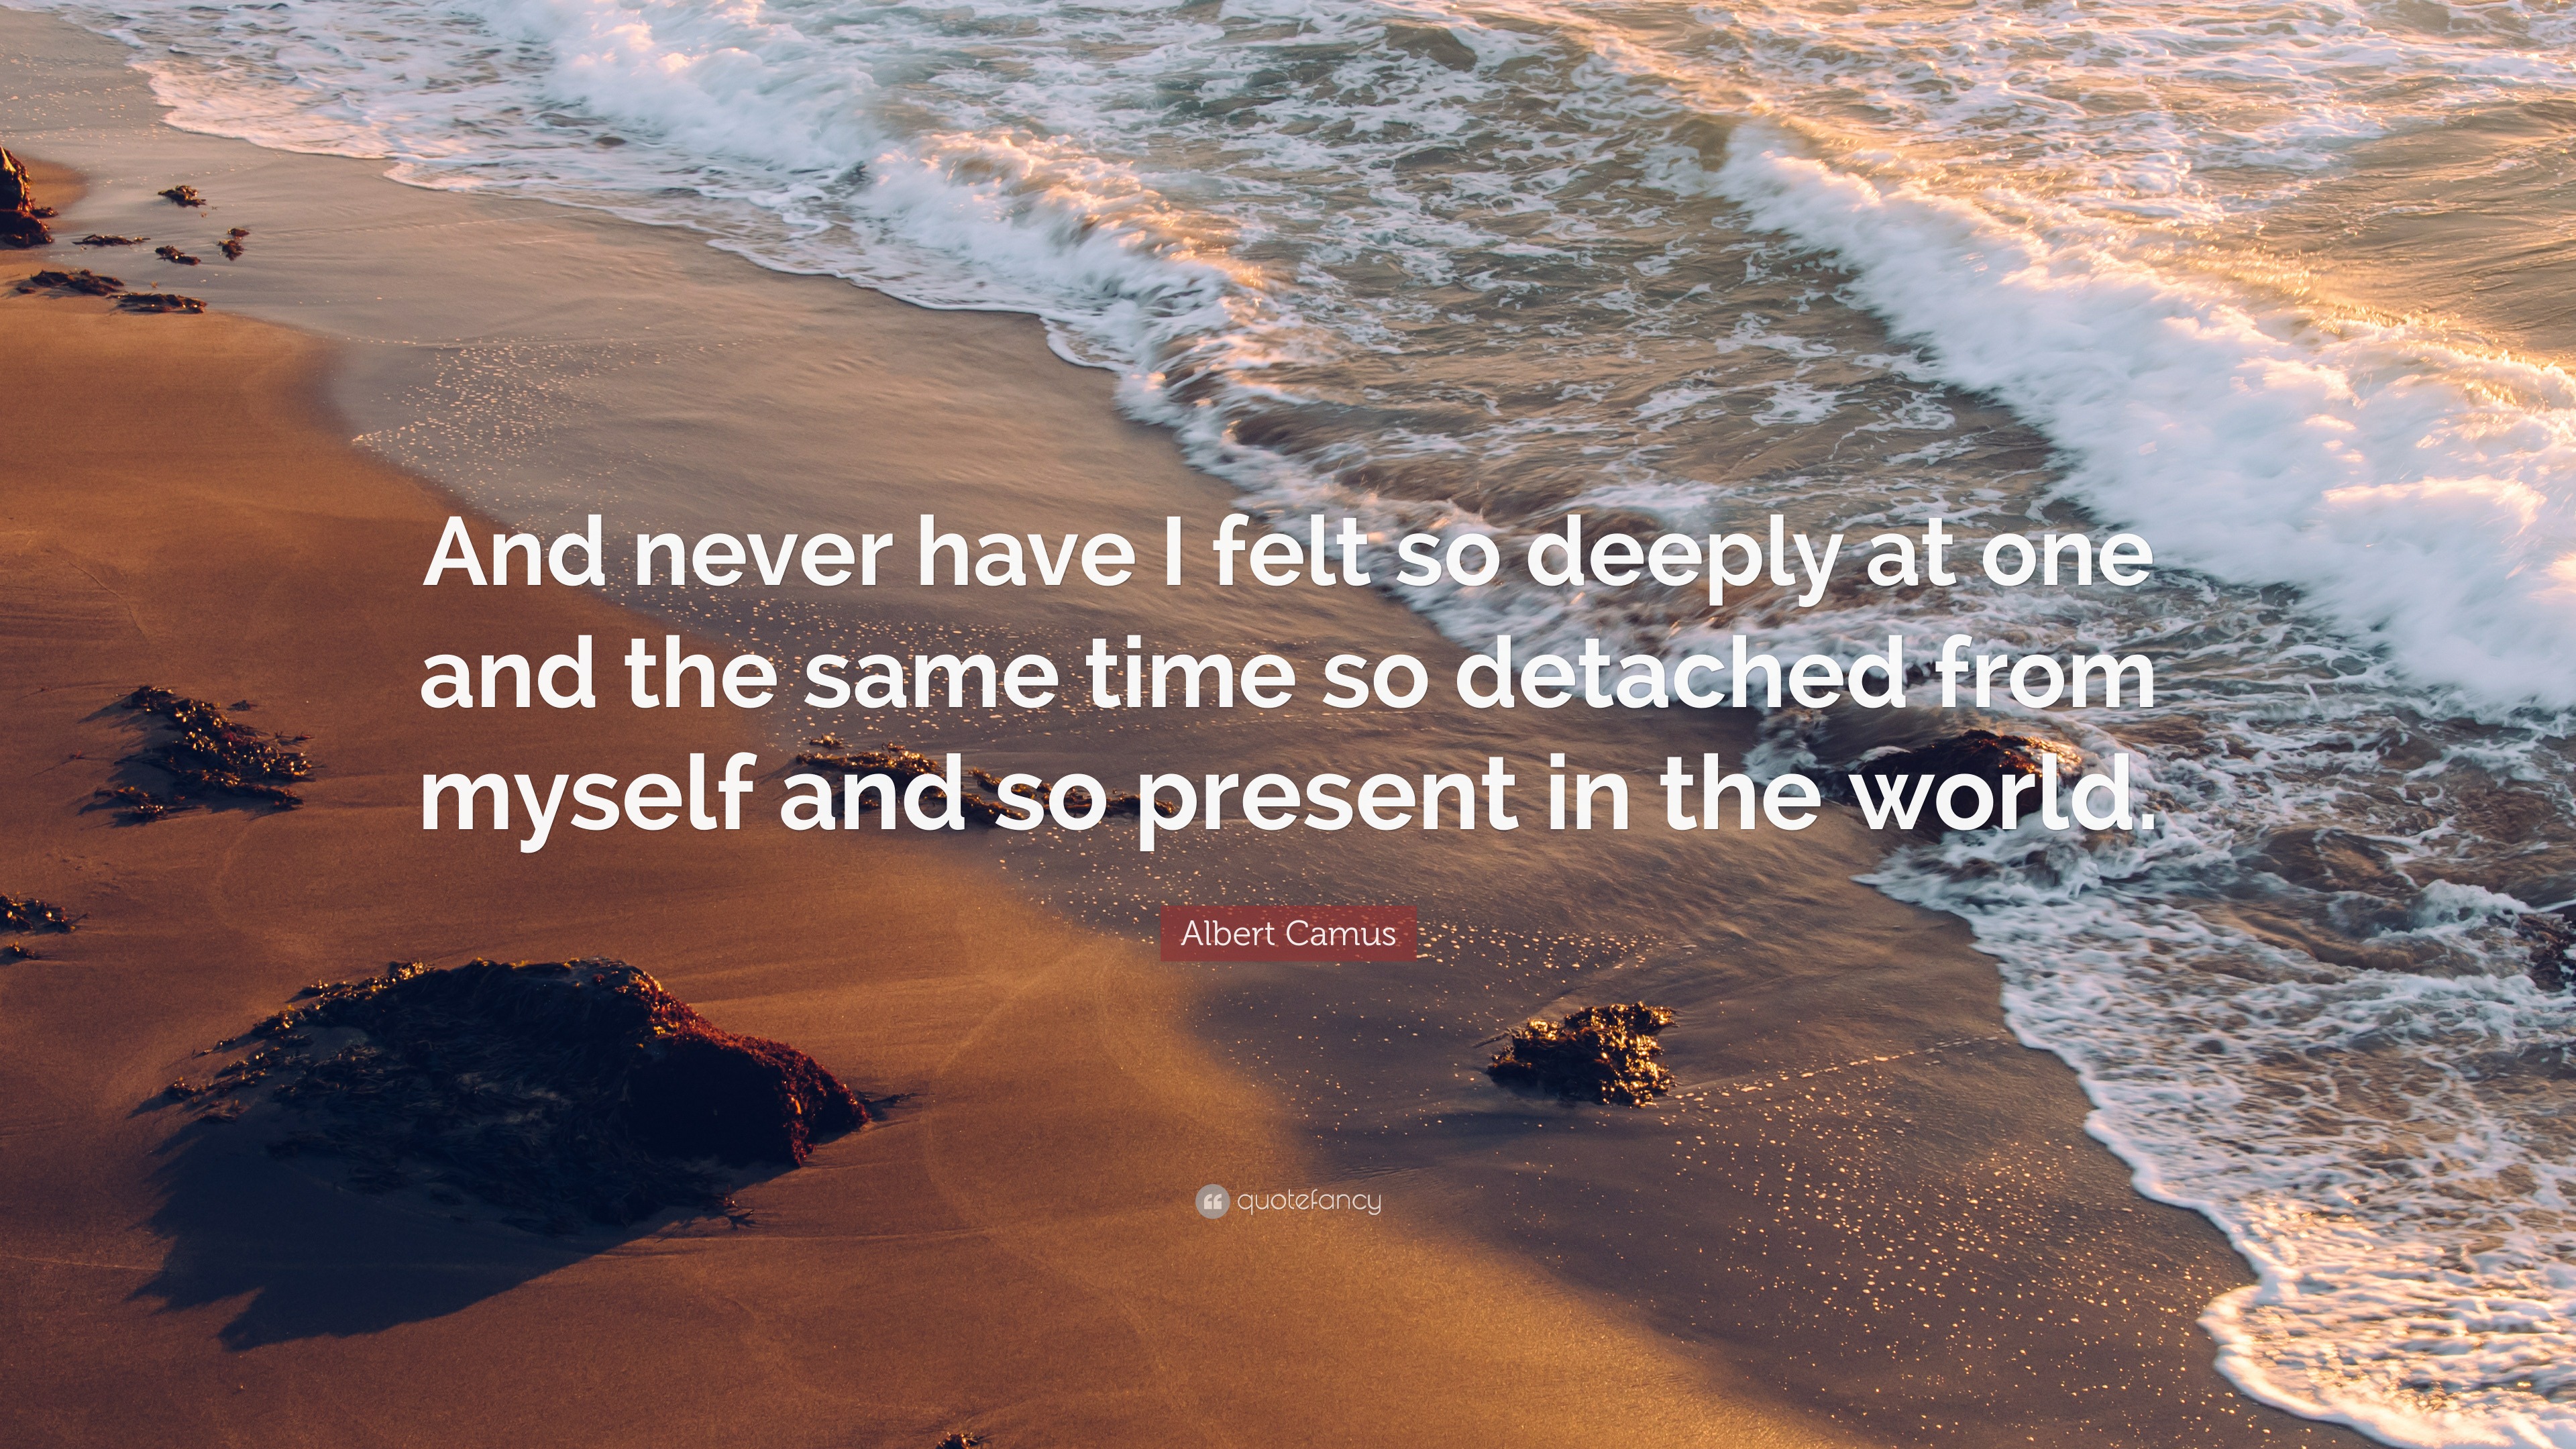 Albert Camus Quote: “And never have I felt so deeply at one and the ...